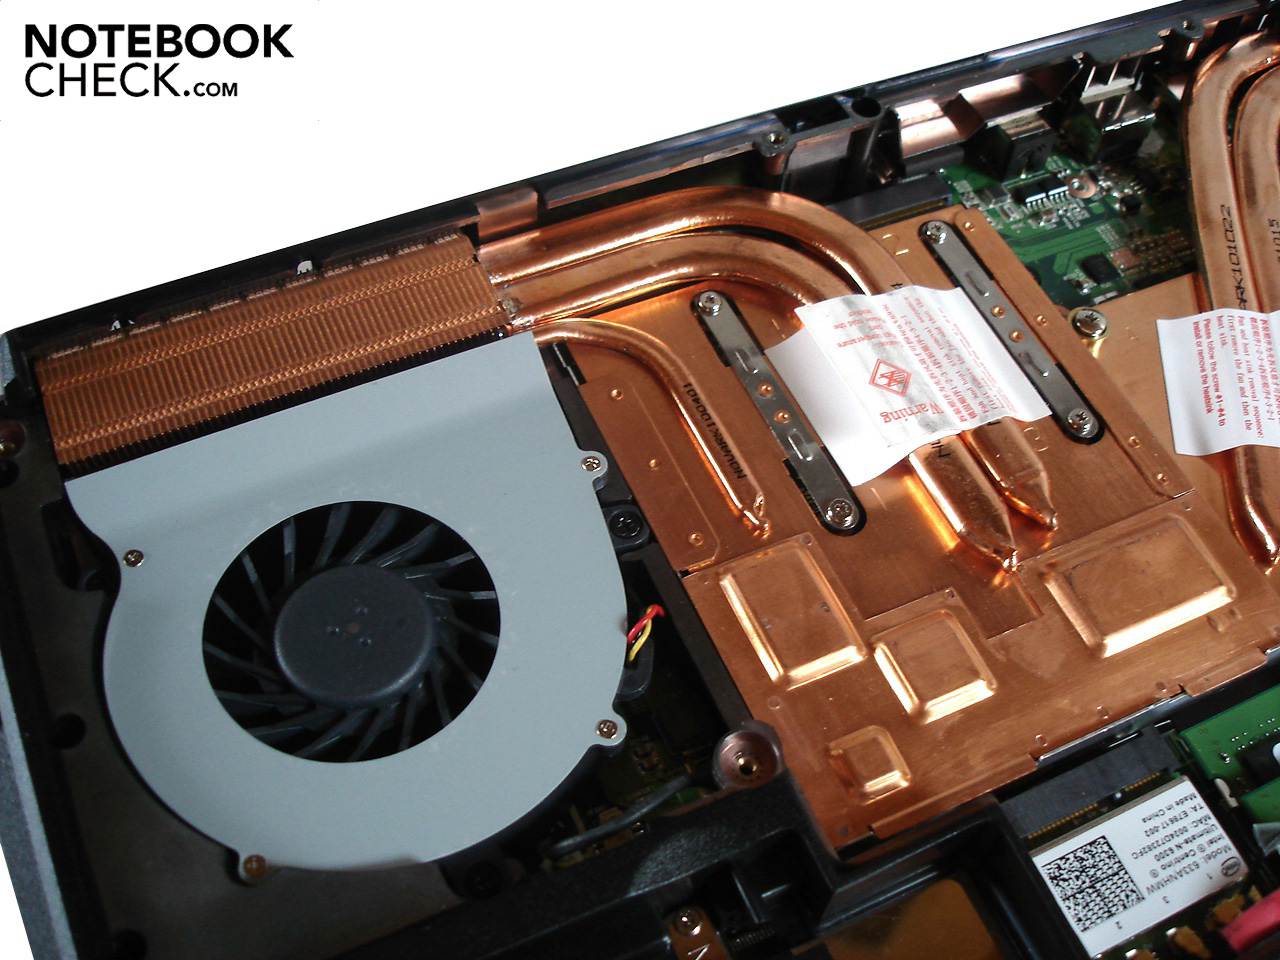 Review AMD Radeon HD 6970M Graphics Card - NotebookCheck 